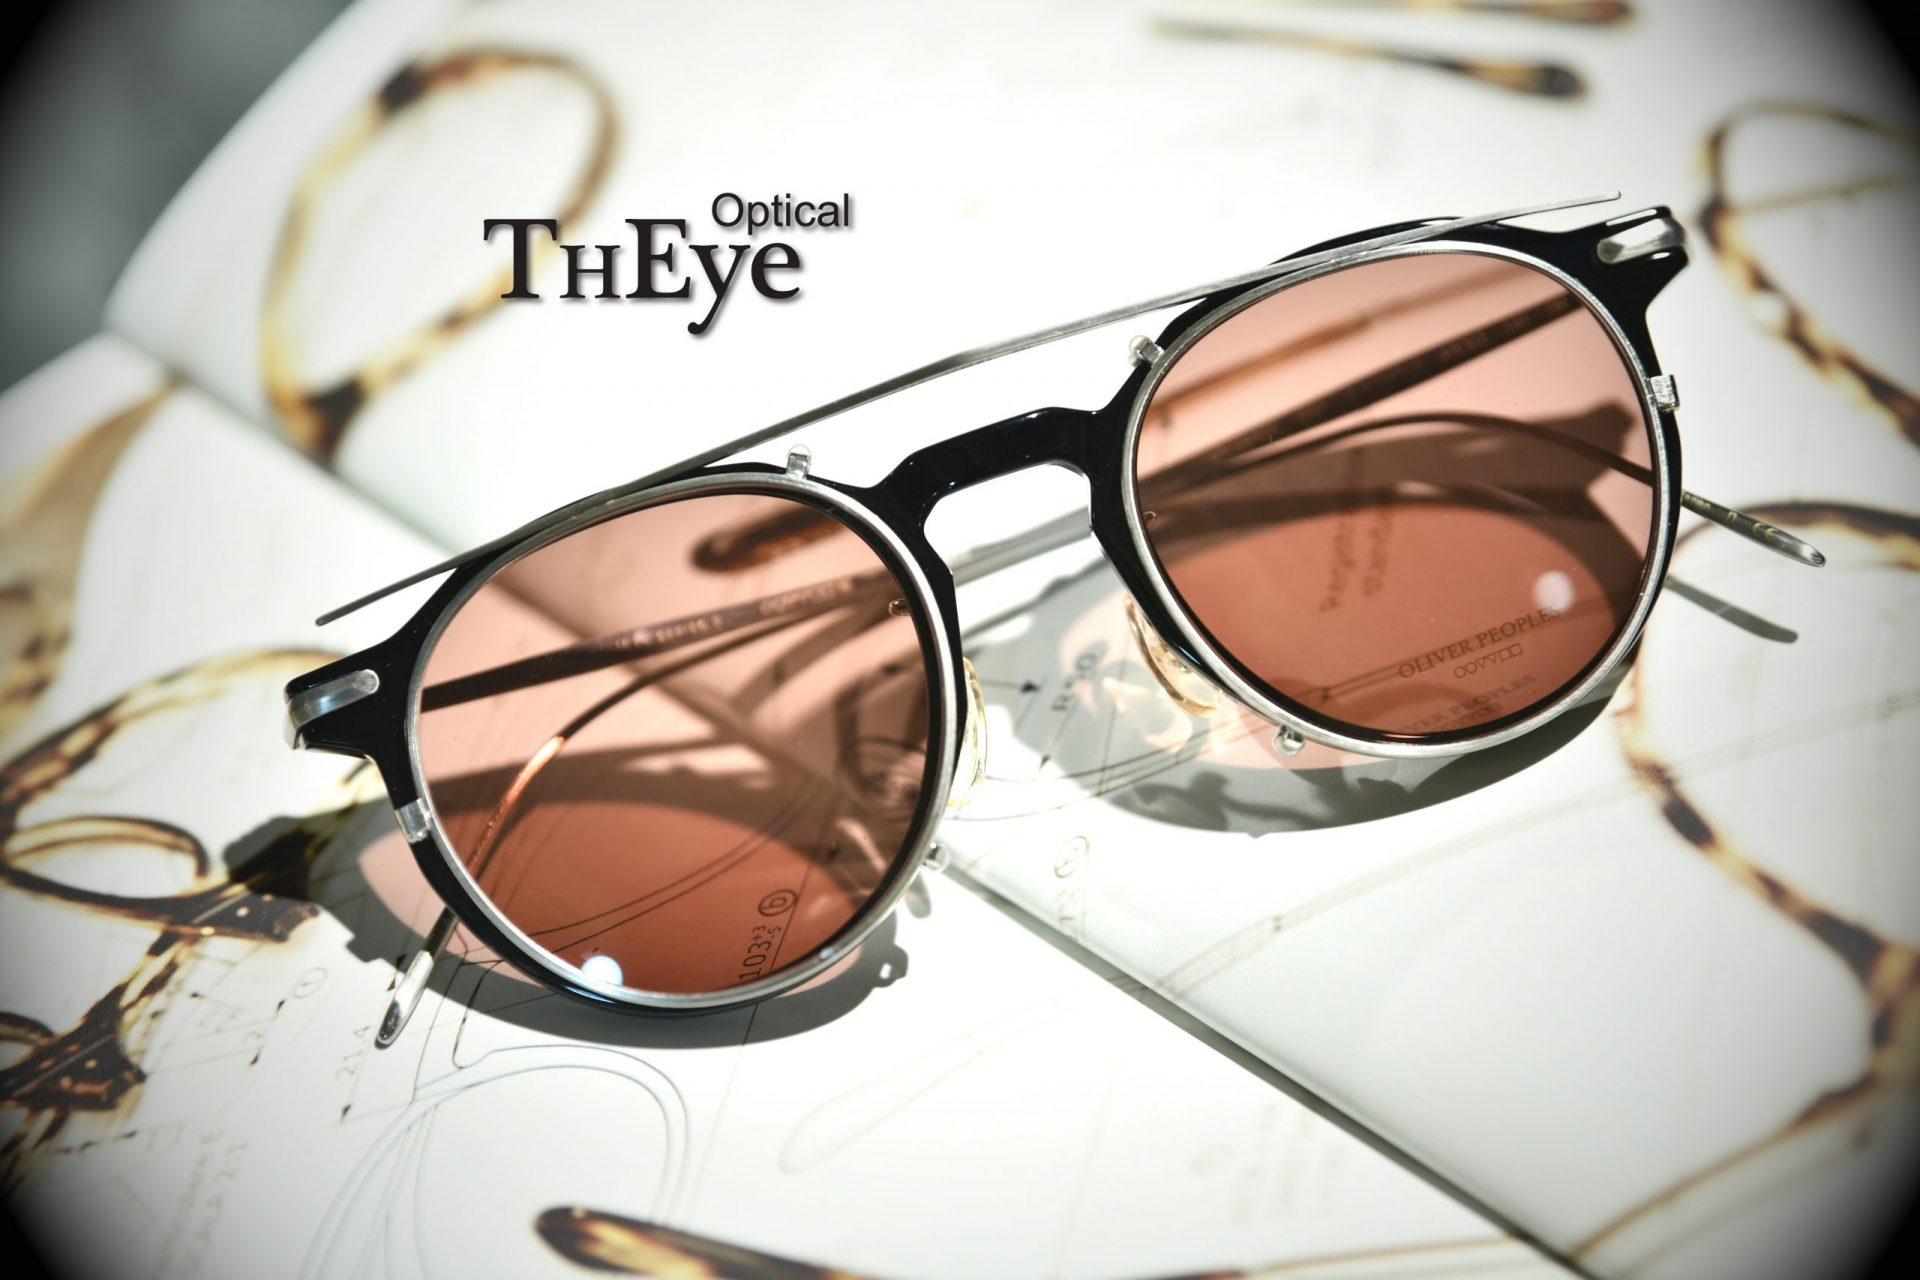 OLIVER PEOPLES - THEye Optical